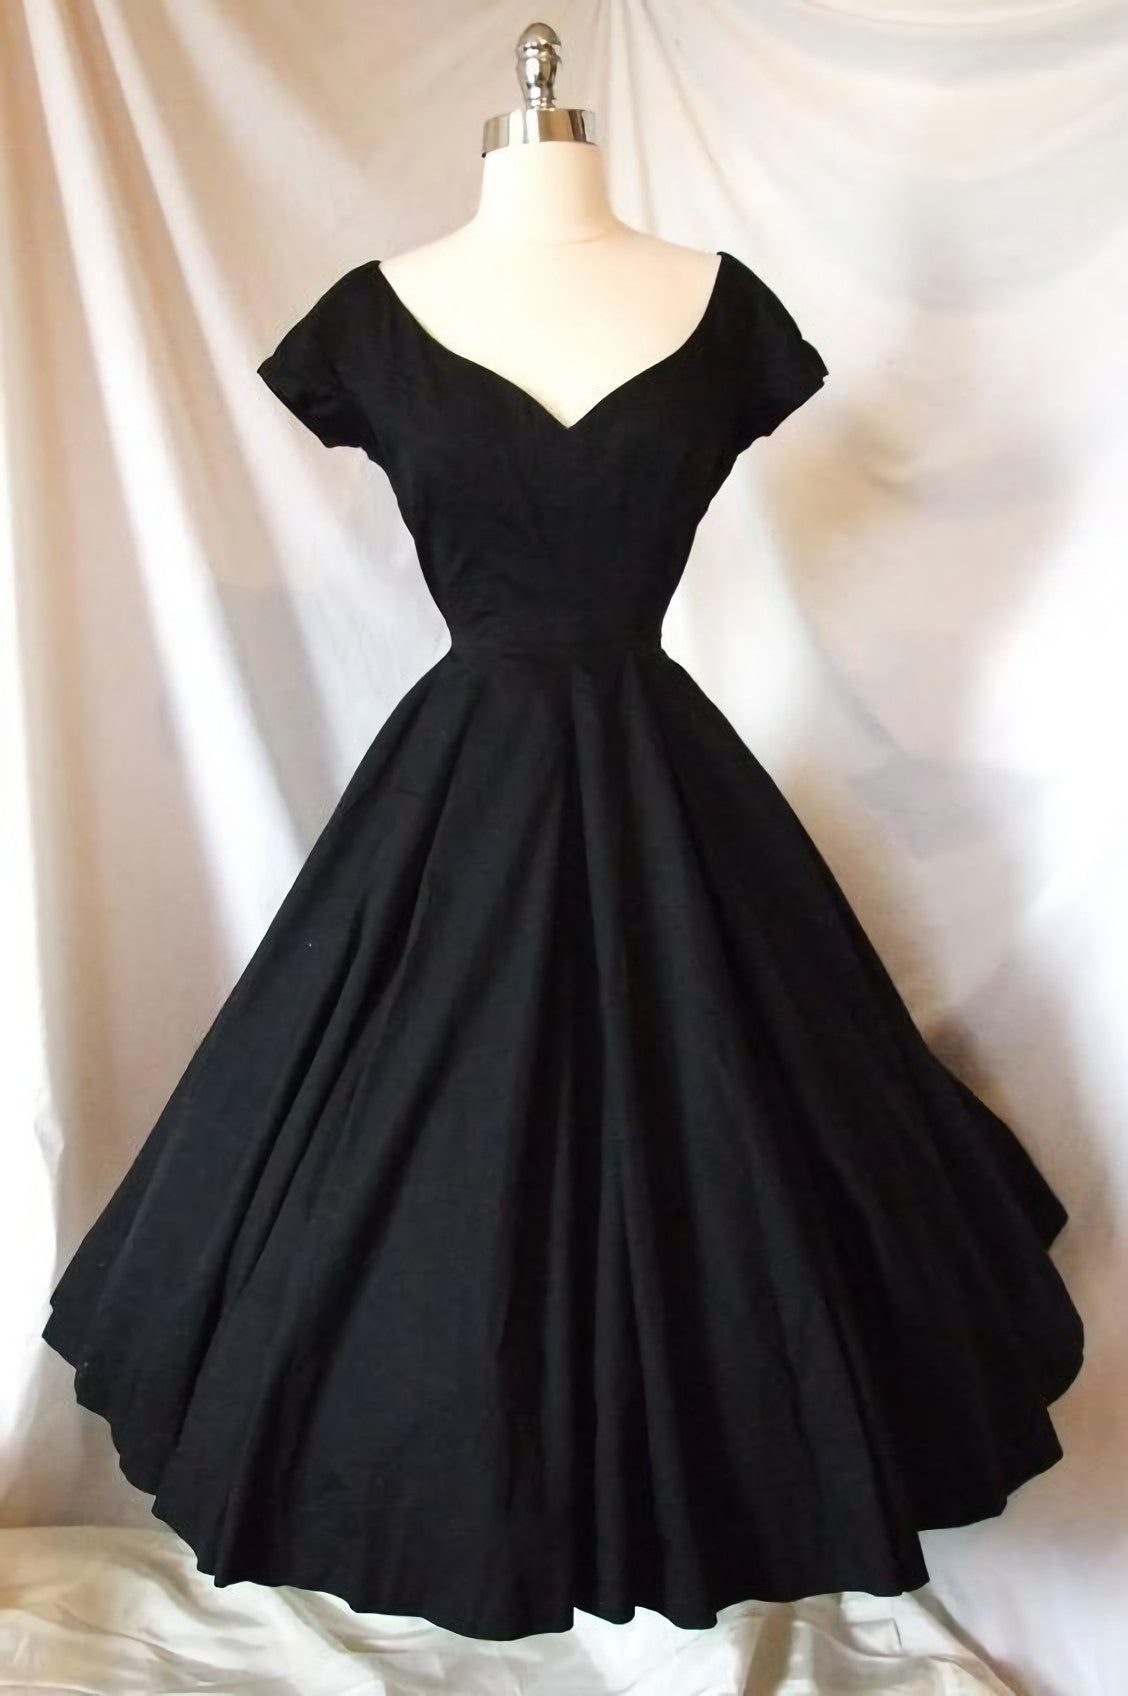 A Line Black Satin Cocktail Party Dresses, Corset Homecoming Dress outfit, Prom Dress Pieces